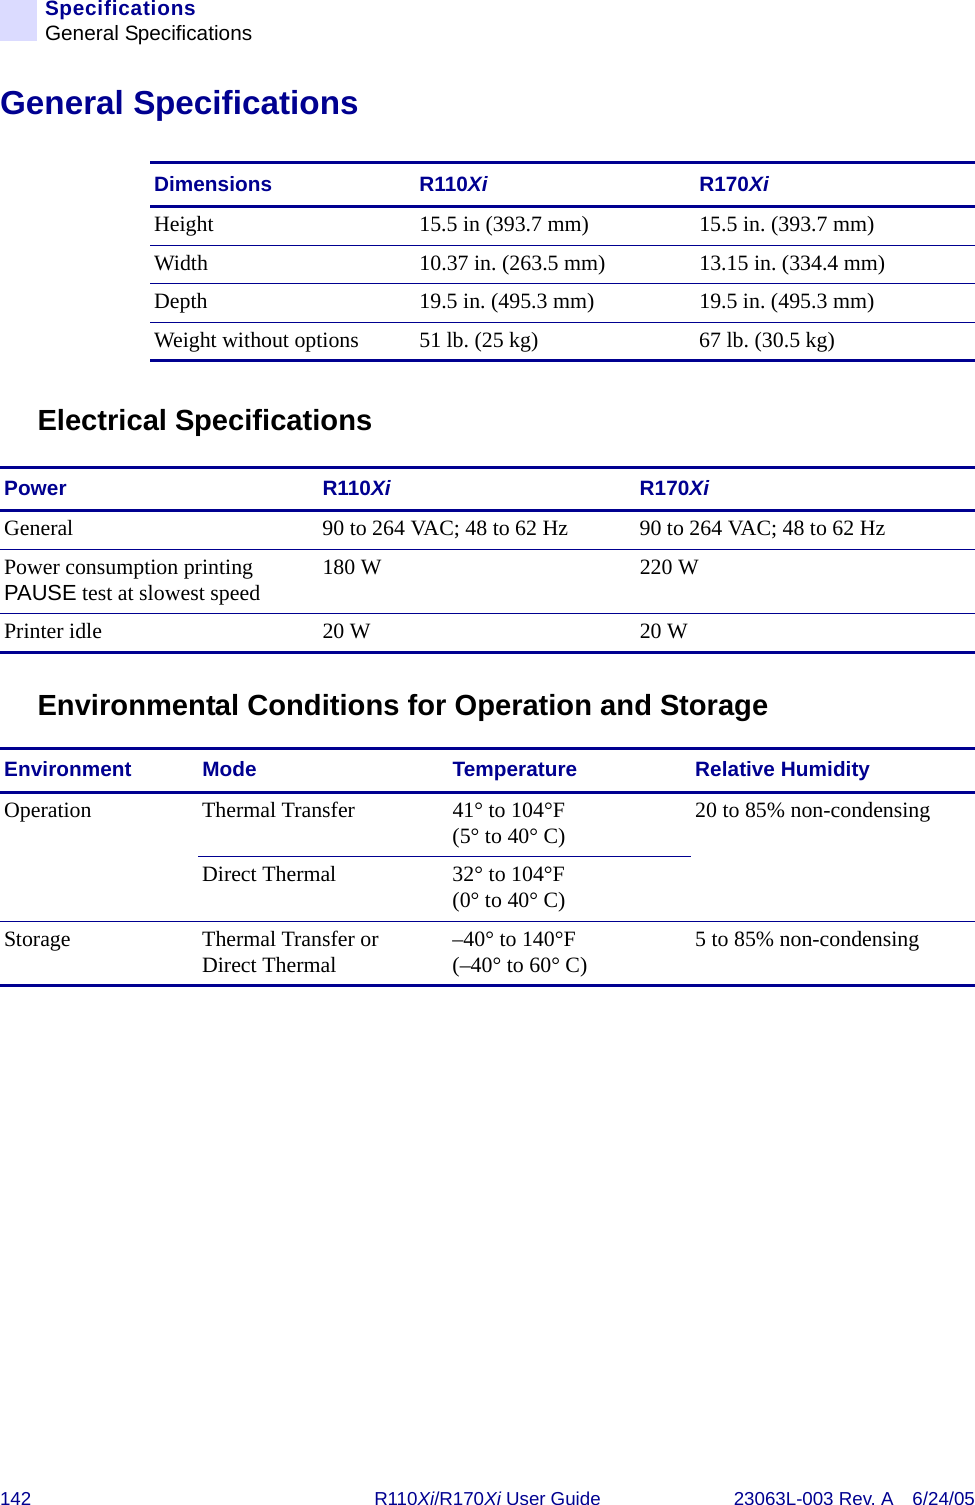 142 R110Xi/R170Xi User Guide 23063L-003 Rev. A 6/24/05SpecificationsGeneral SpecificationsGeneral SpecificationsElectrical SpecificationsEnvironmental Conditions for Operation and StorageDimensions R110Xi R170XiHeight 15.5 in (393.7 mm) 15.5 in. (393.7 mm)Width 10.37 in. (263.5 mm) 13.15 in. (334.4 mm)Depth 19.5 in. (495.3 mm) 19.5 in. (495.3 mm)Weight without options 51 lb. (25 kg) 67 lb. (30.5 kg)Power R110Xi R170XiGeneral 90 to 264 VAC; 48 to 62 Hz 90 to 264 VAC; 48 to 62 HzPower consumption printing PAUSE test at slowest speed 180 W 220 WPrinter idle 20 W 20 WEnvironment Mode Temperature Relative HumidityOperation  Thermal Transfer 41° to 104°F(5° to 40° C) 20 to 85% non-condensingDirect Thermal 32° to 104°F(0° to 40° C)Storage Thermal Transfer or Direct Thermal –40° to 140°F(–40° to 60° C) 5 to 85% non-condensing